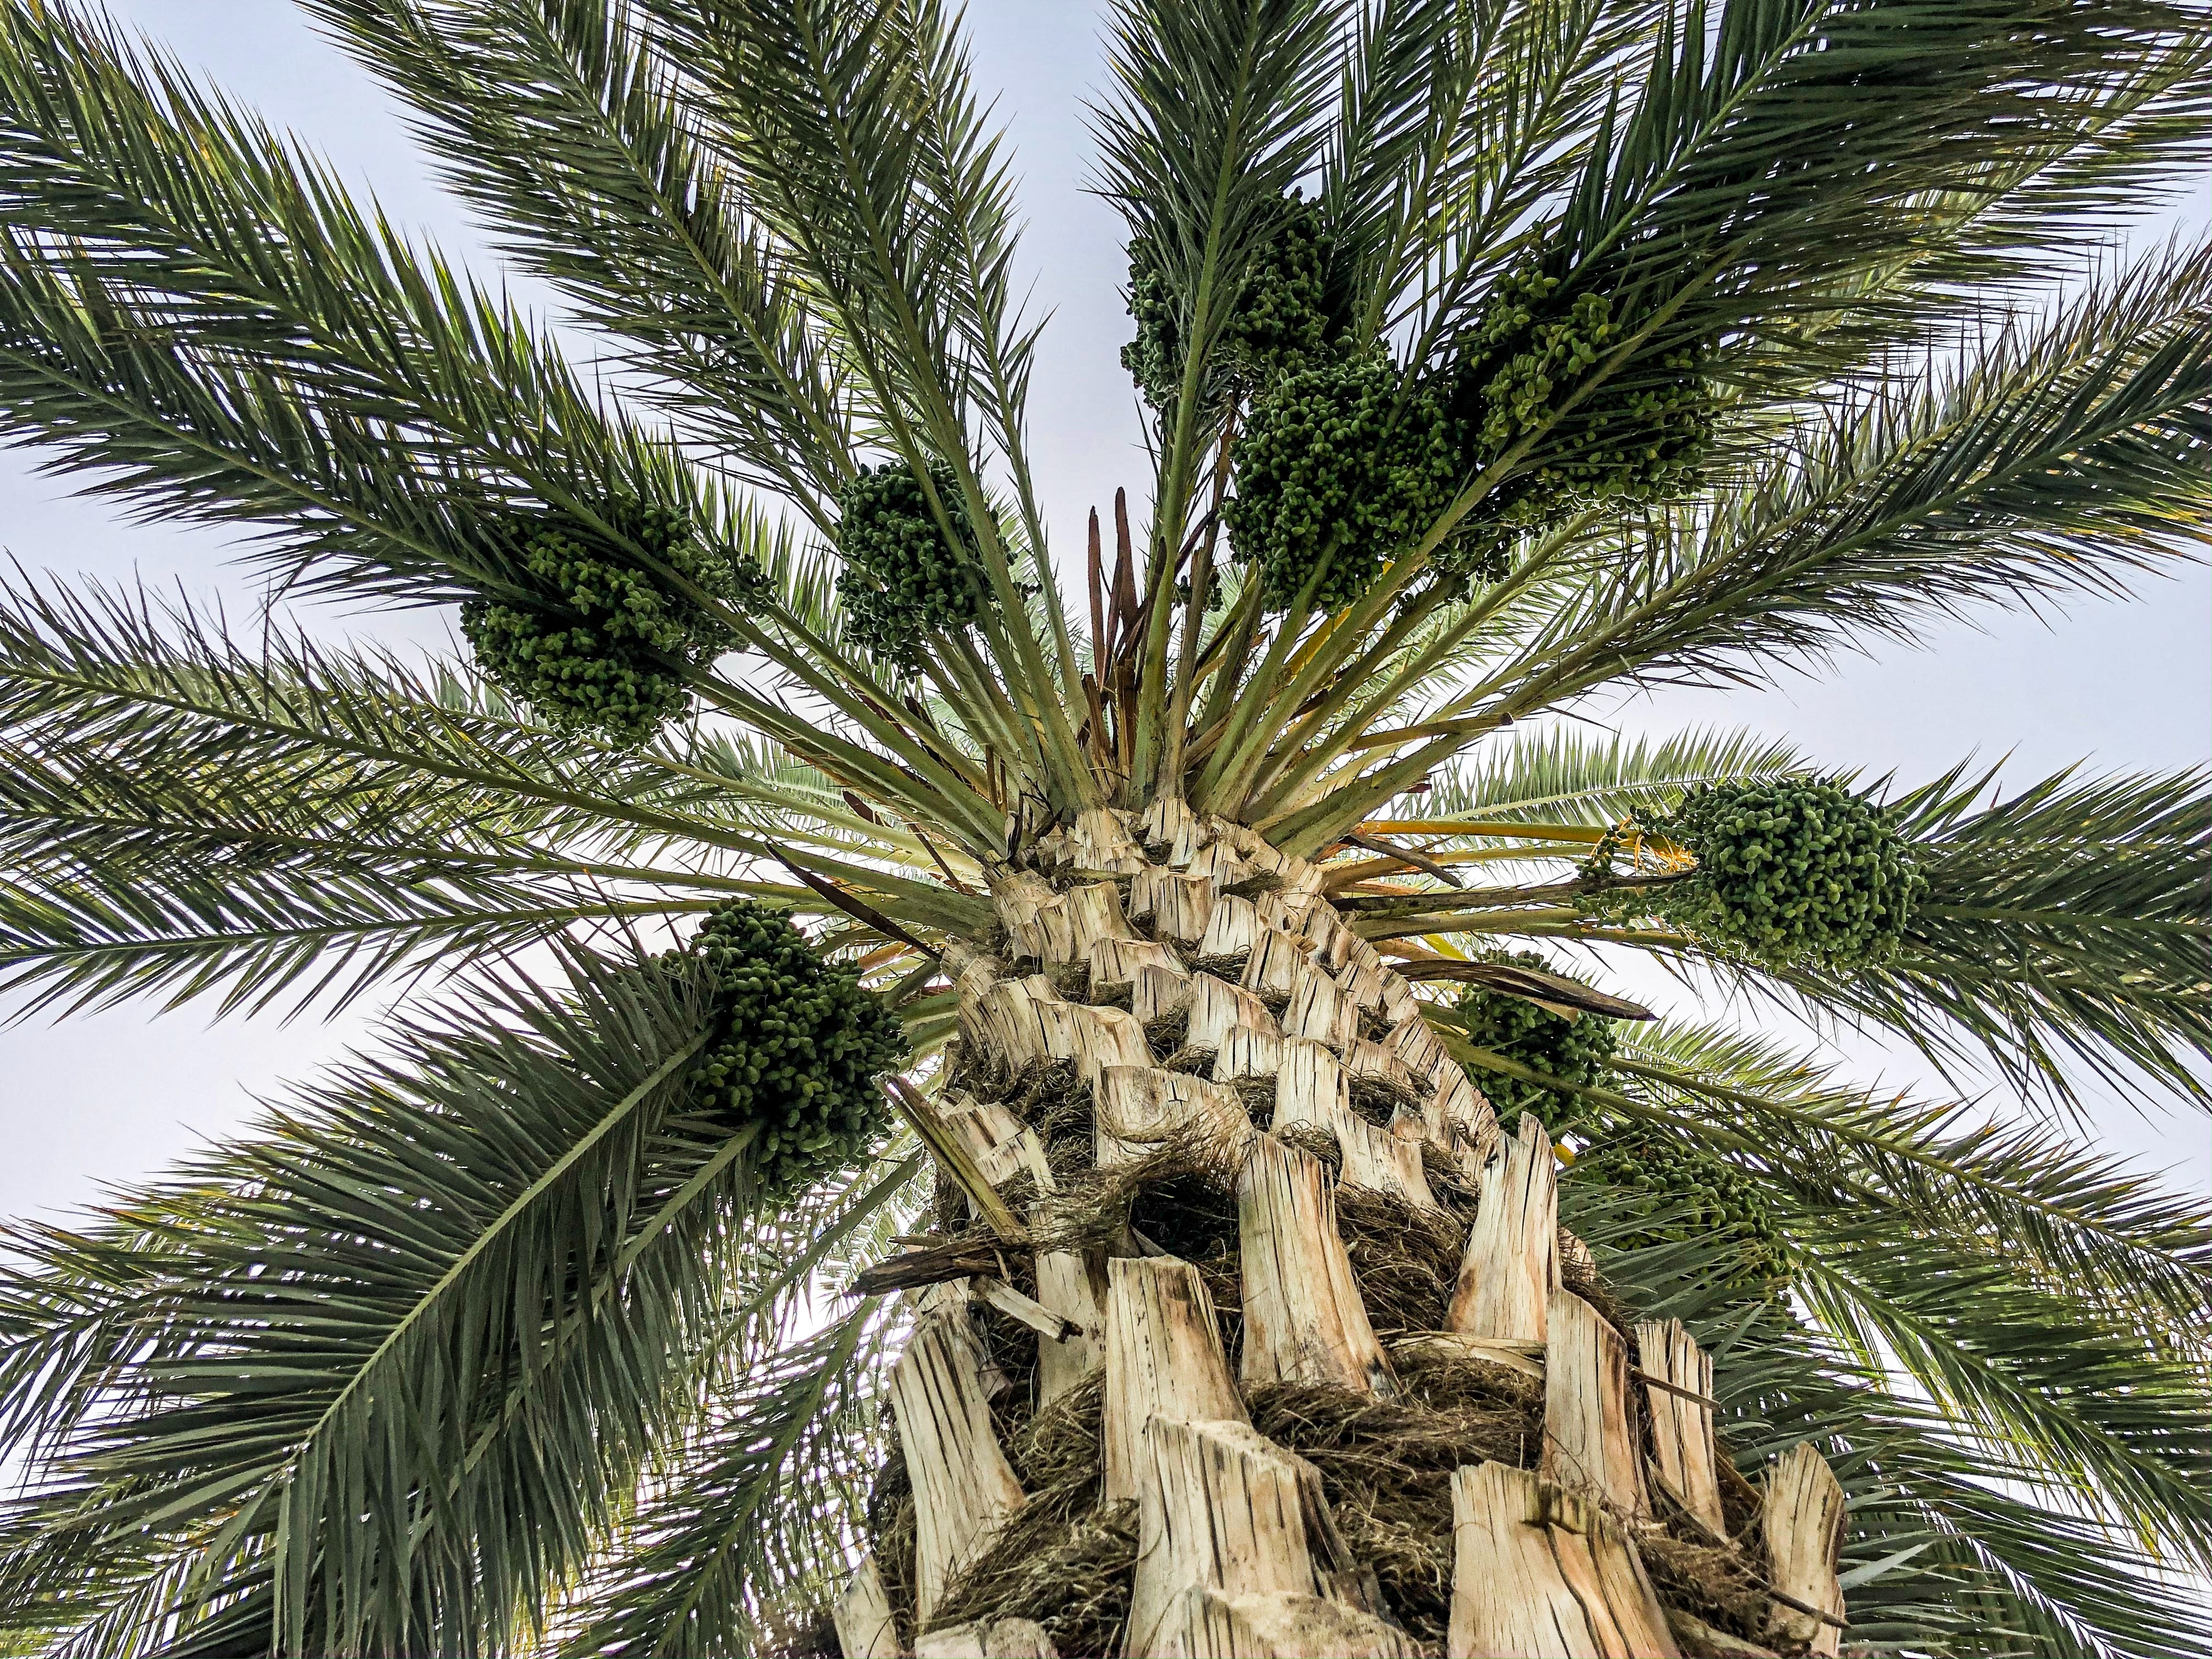 Palm tree mapping using deep learning on aerial images